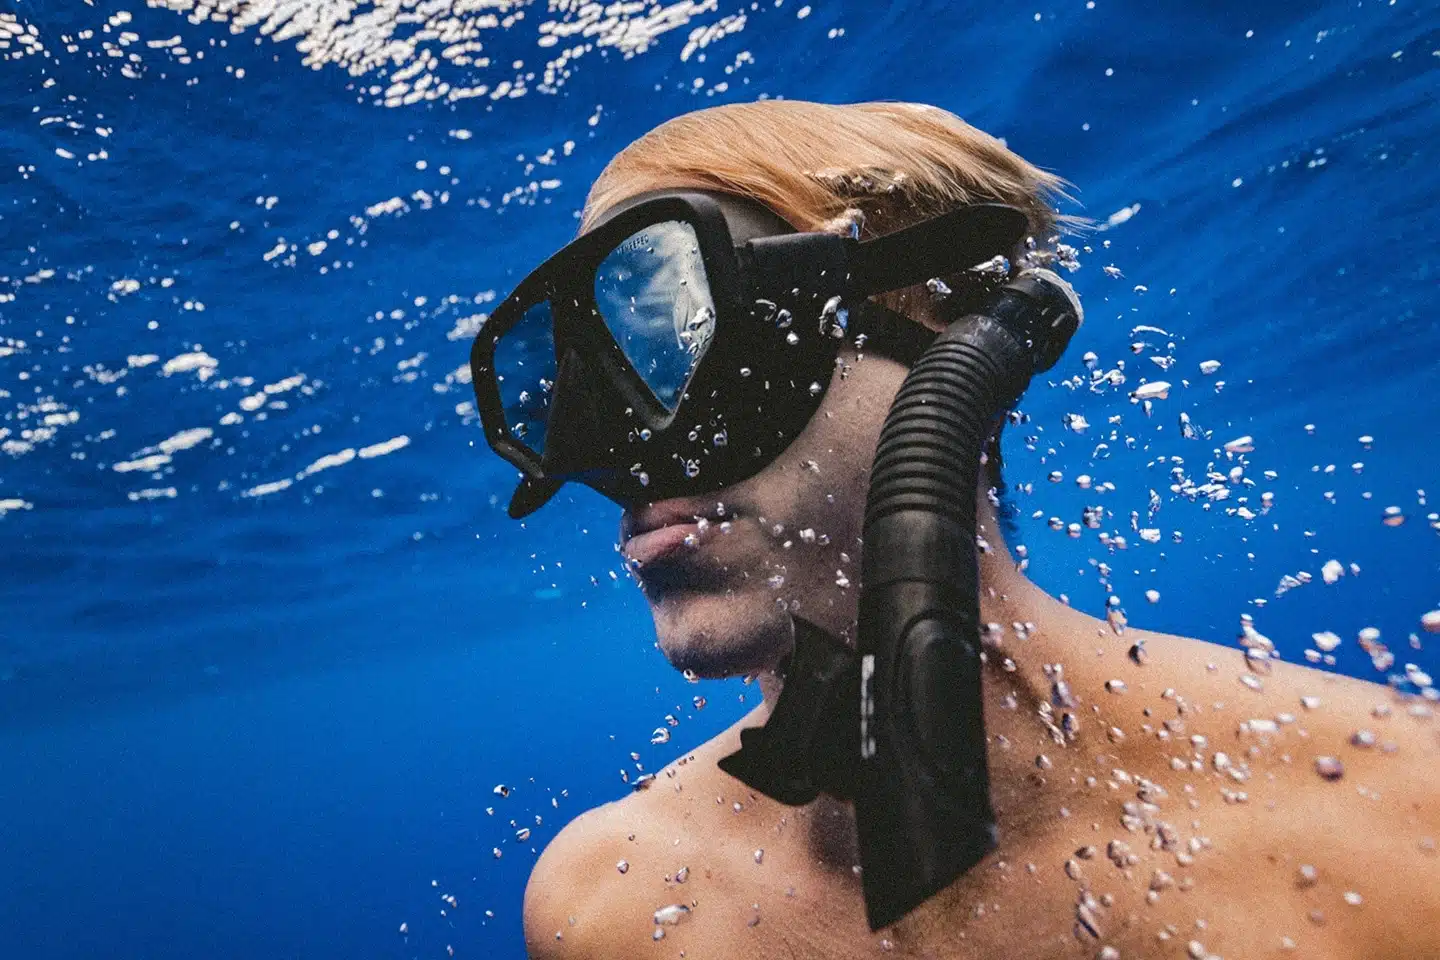  How To Attach A Snorkel To A Mask